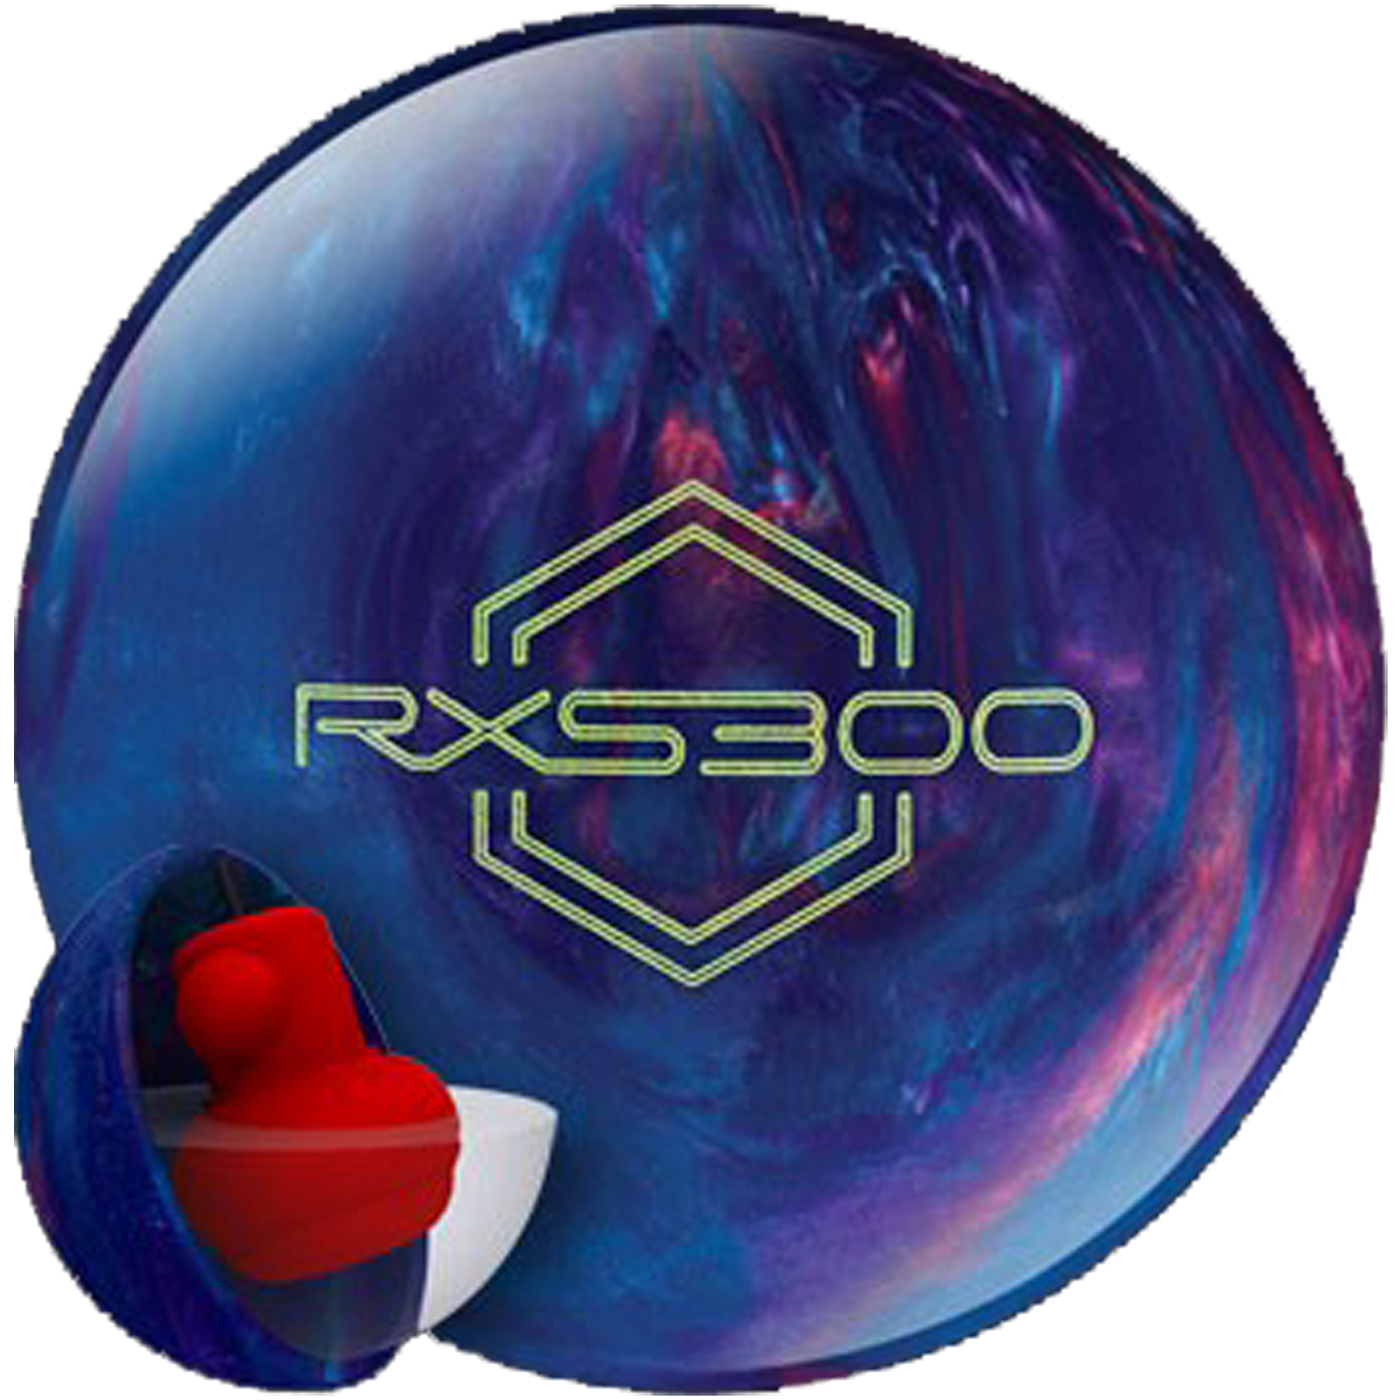 RXS300 Bowling Ball with Core